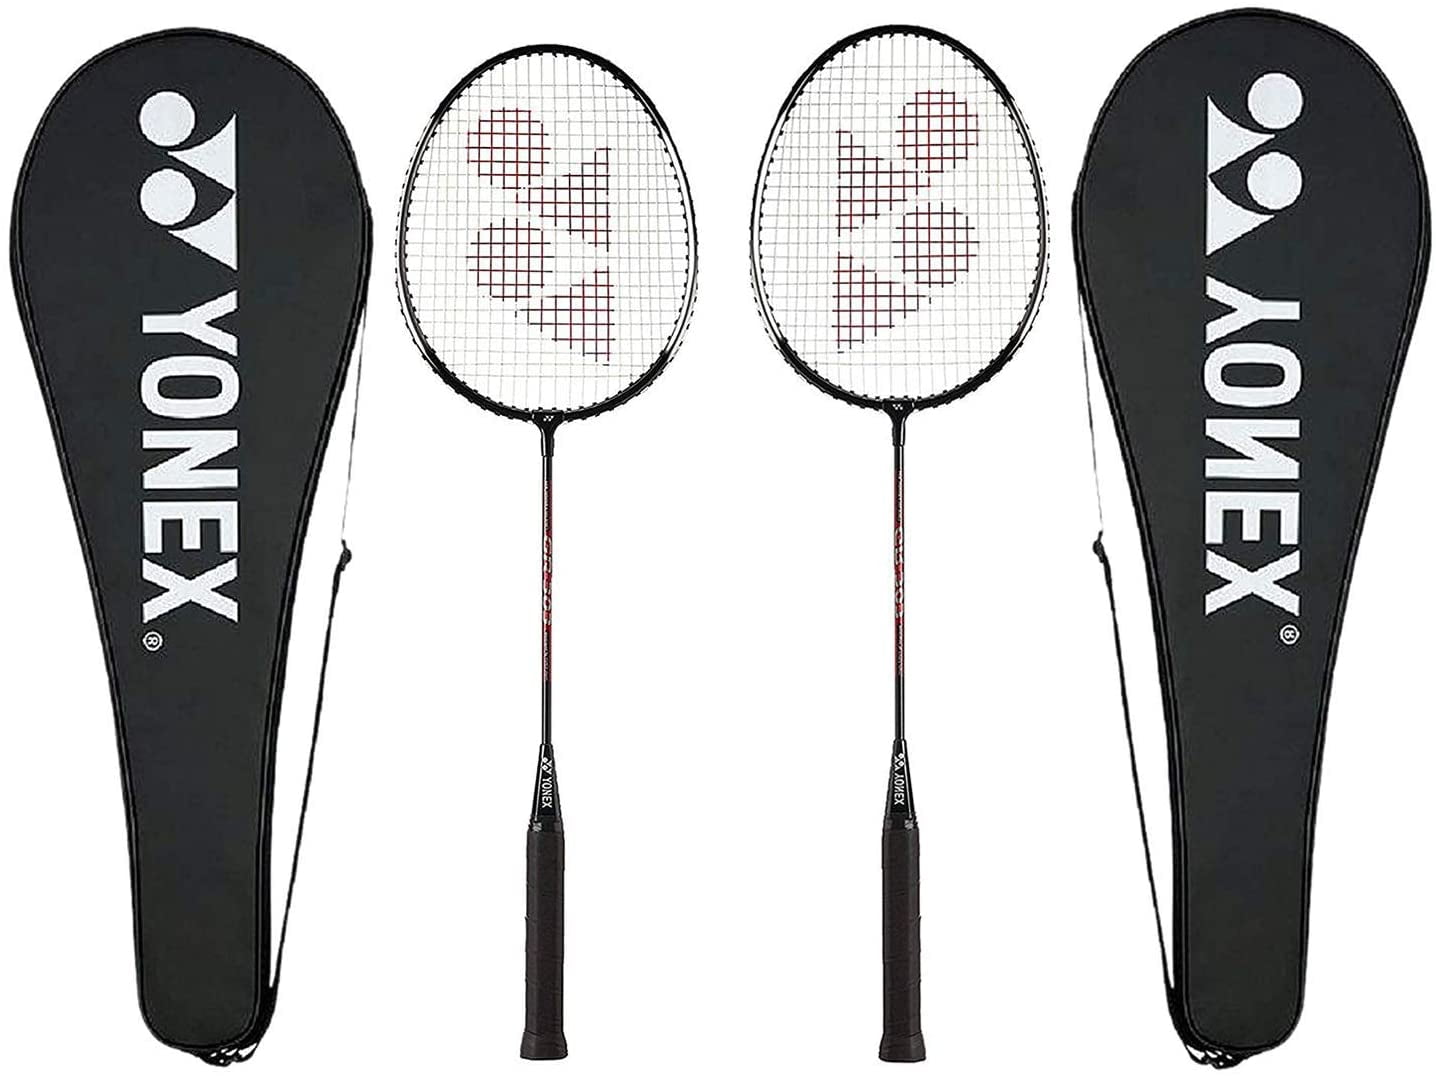 Yonex GR 303 Badminton Racket with Full Cover Steel Shaft - Pack of 2